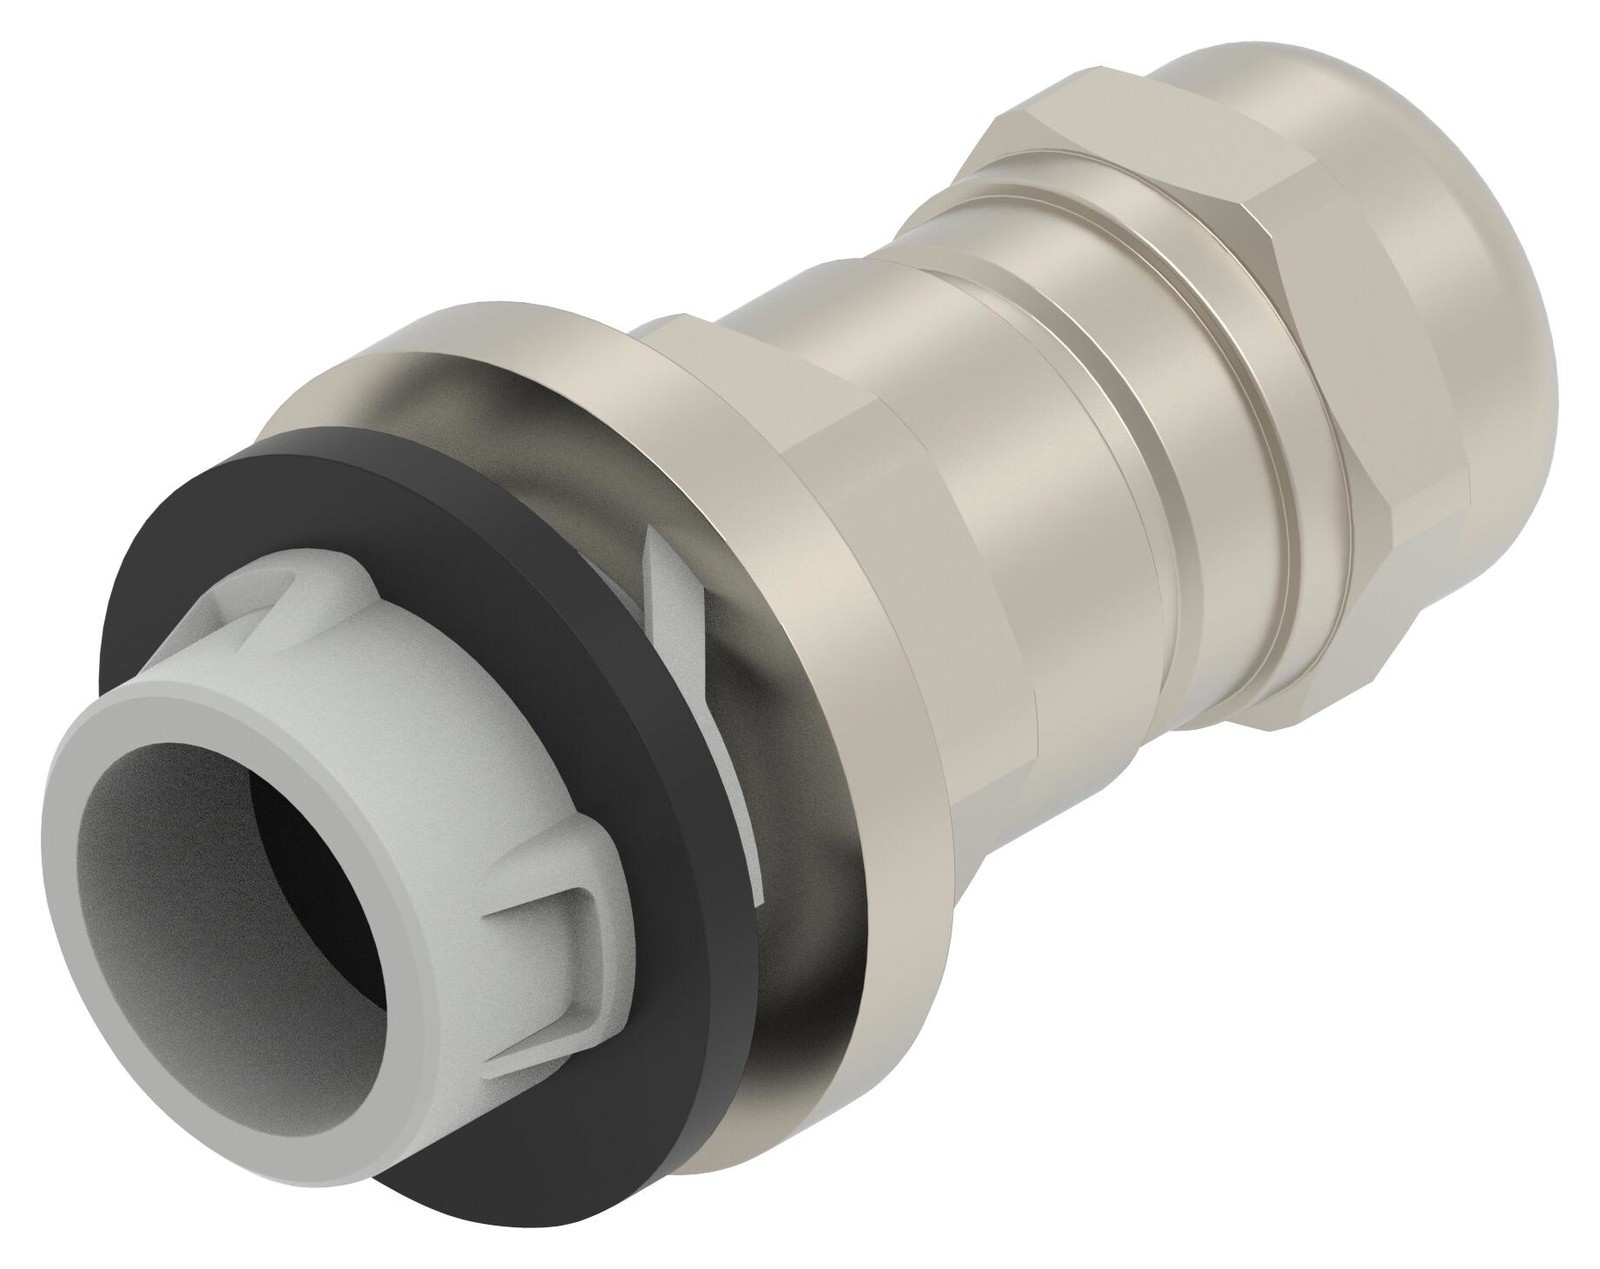 Entrelec TE Connectivity 1Sng623004R0000 Cable Gland, Brass, 5-9mm